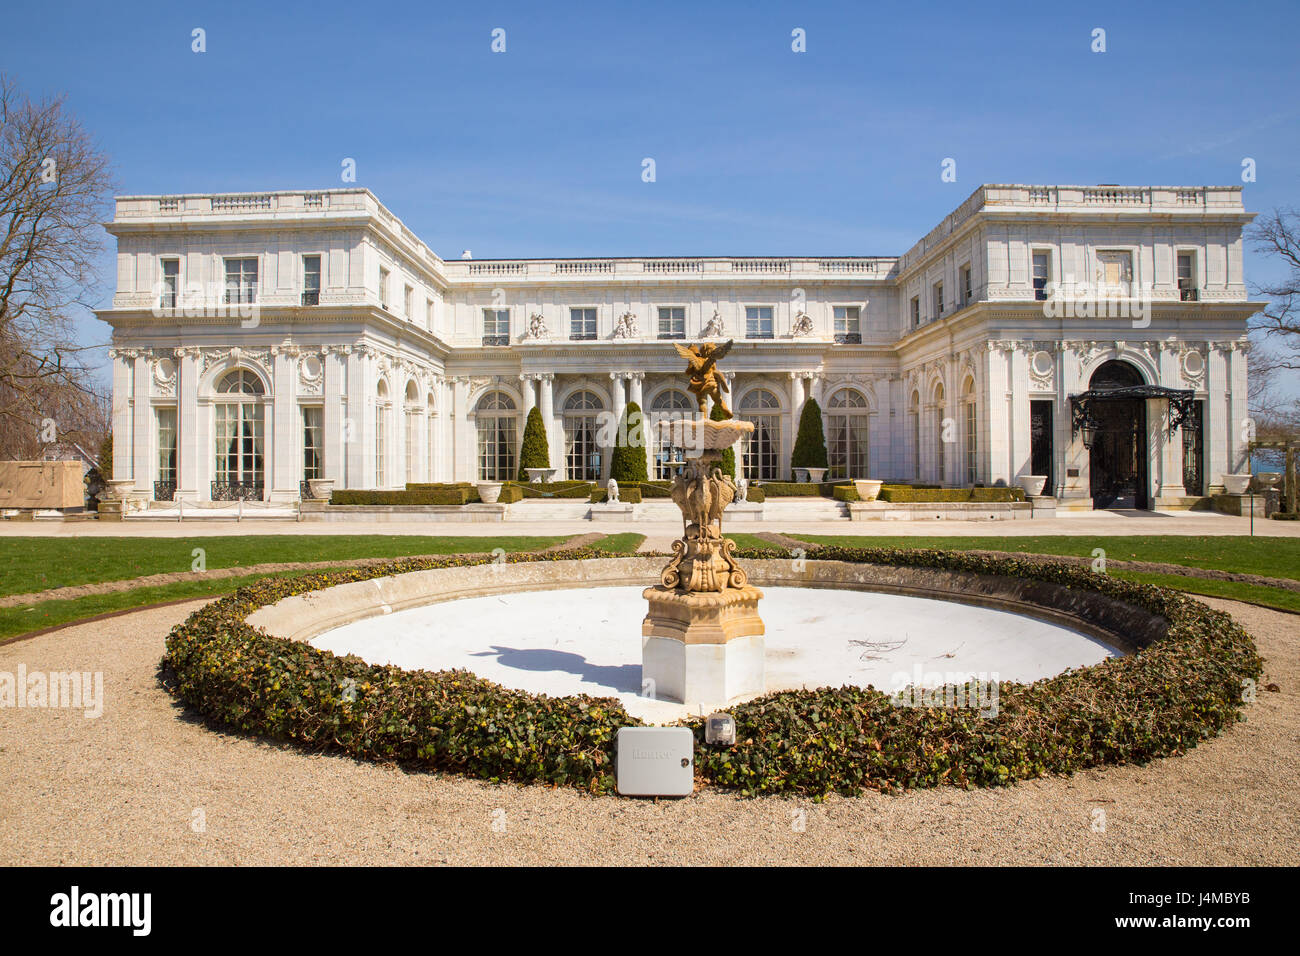 Exterior view of historic Rosecliff Mansion in Rhode Island, USA Stock Photo